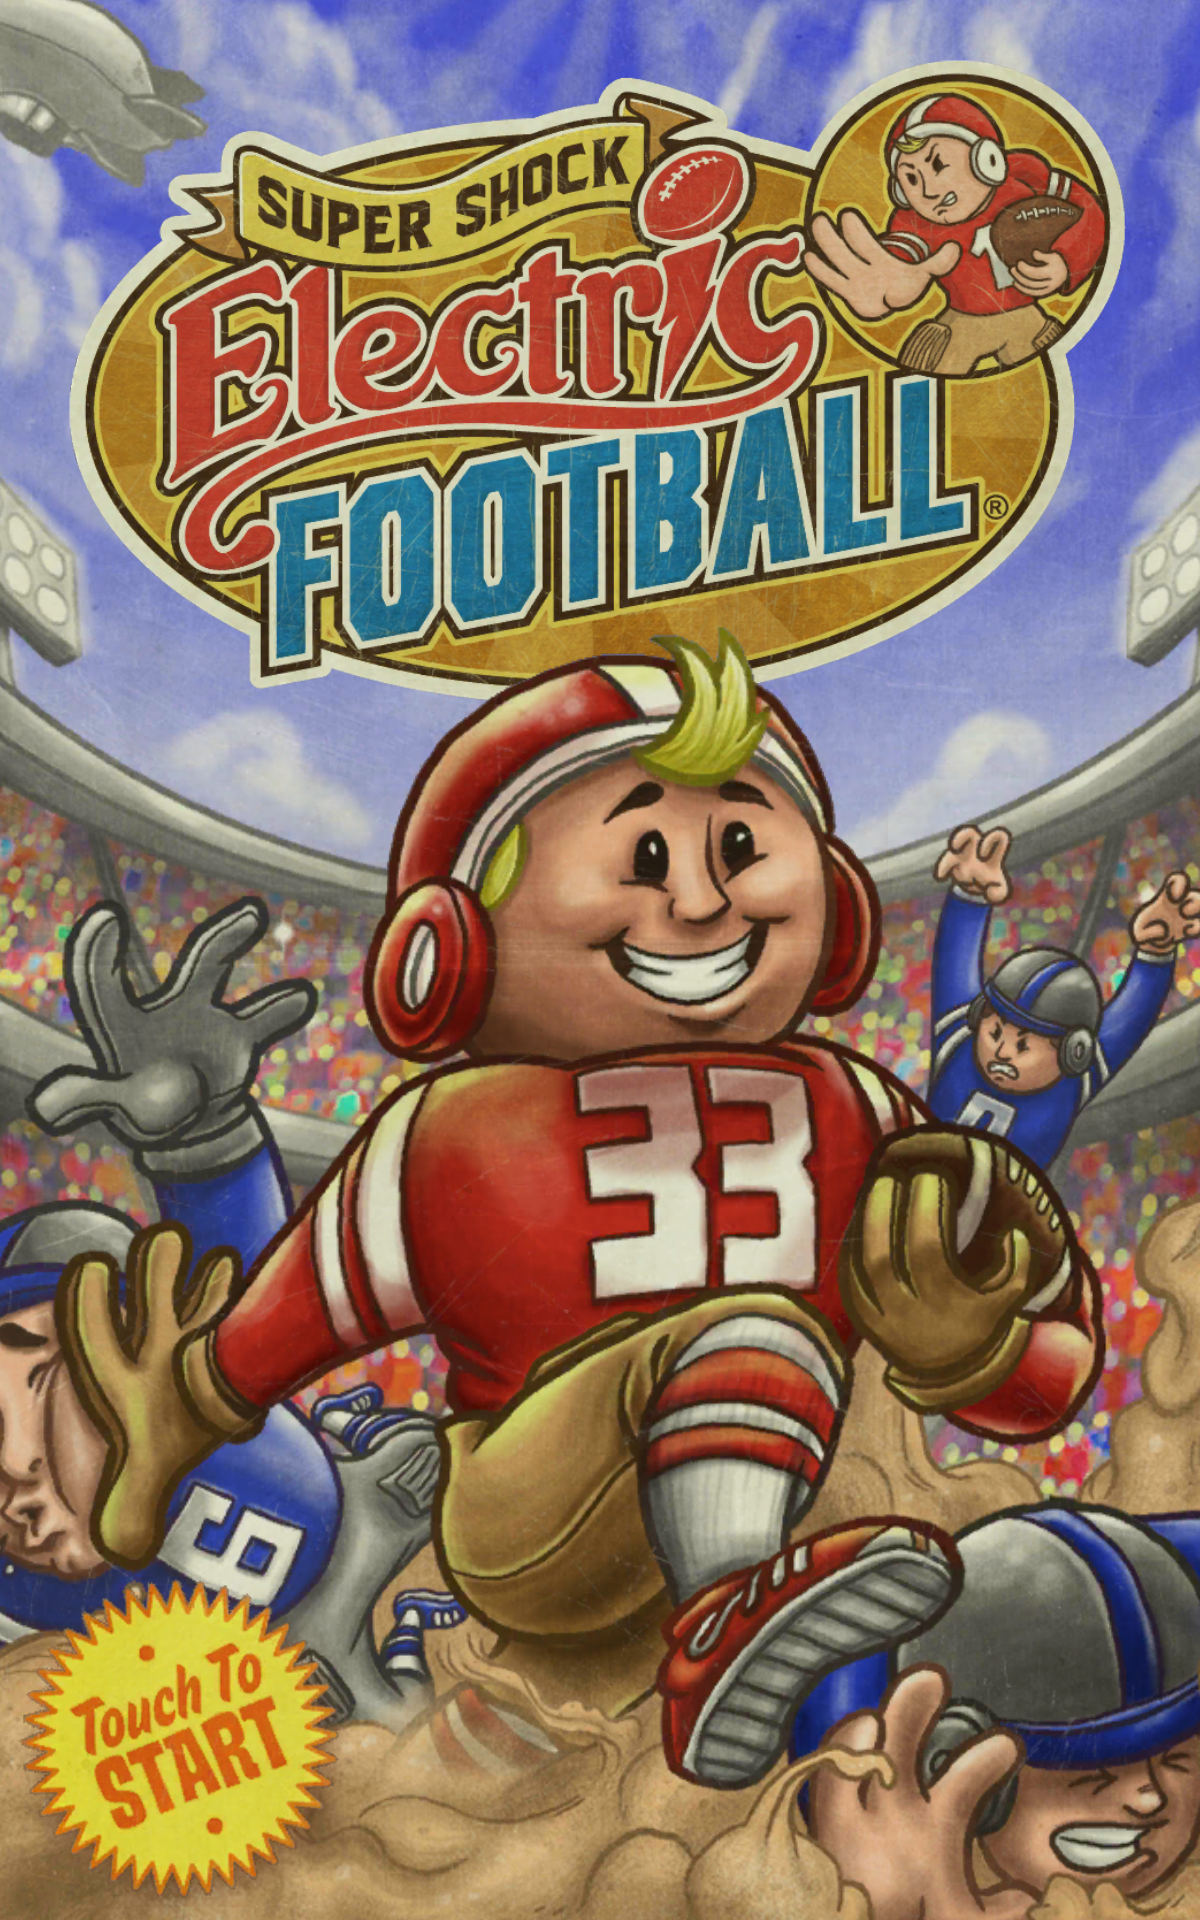 Android application Super Shock Electric Football screenshort